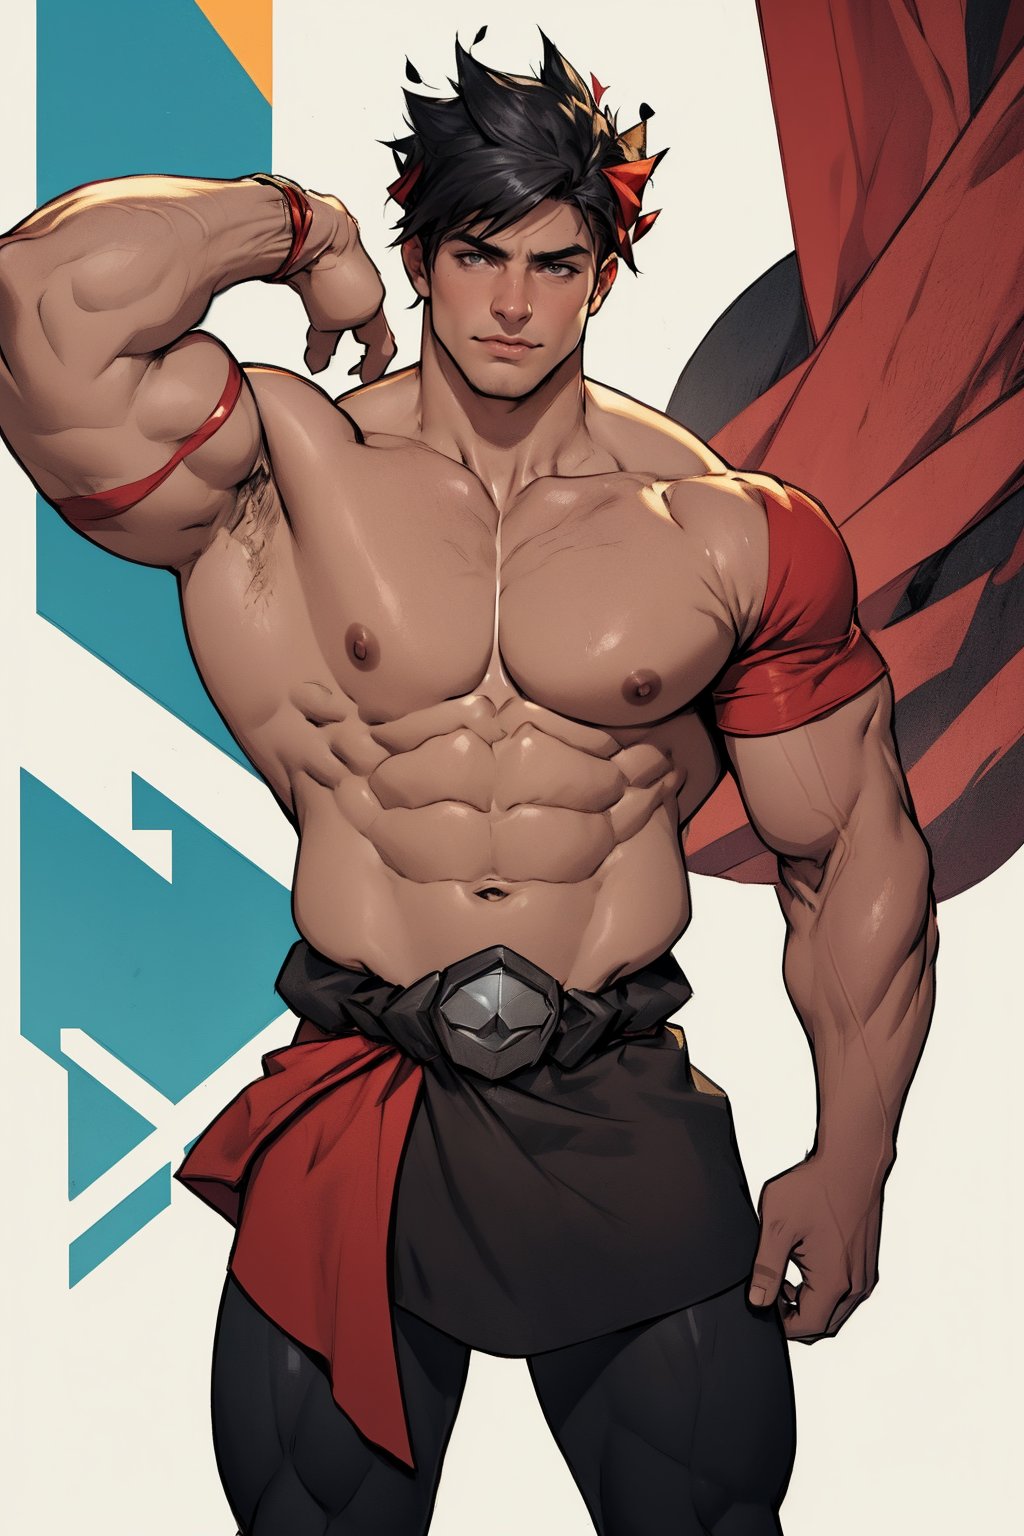 Zagreus with large muscular body shape and veins